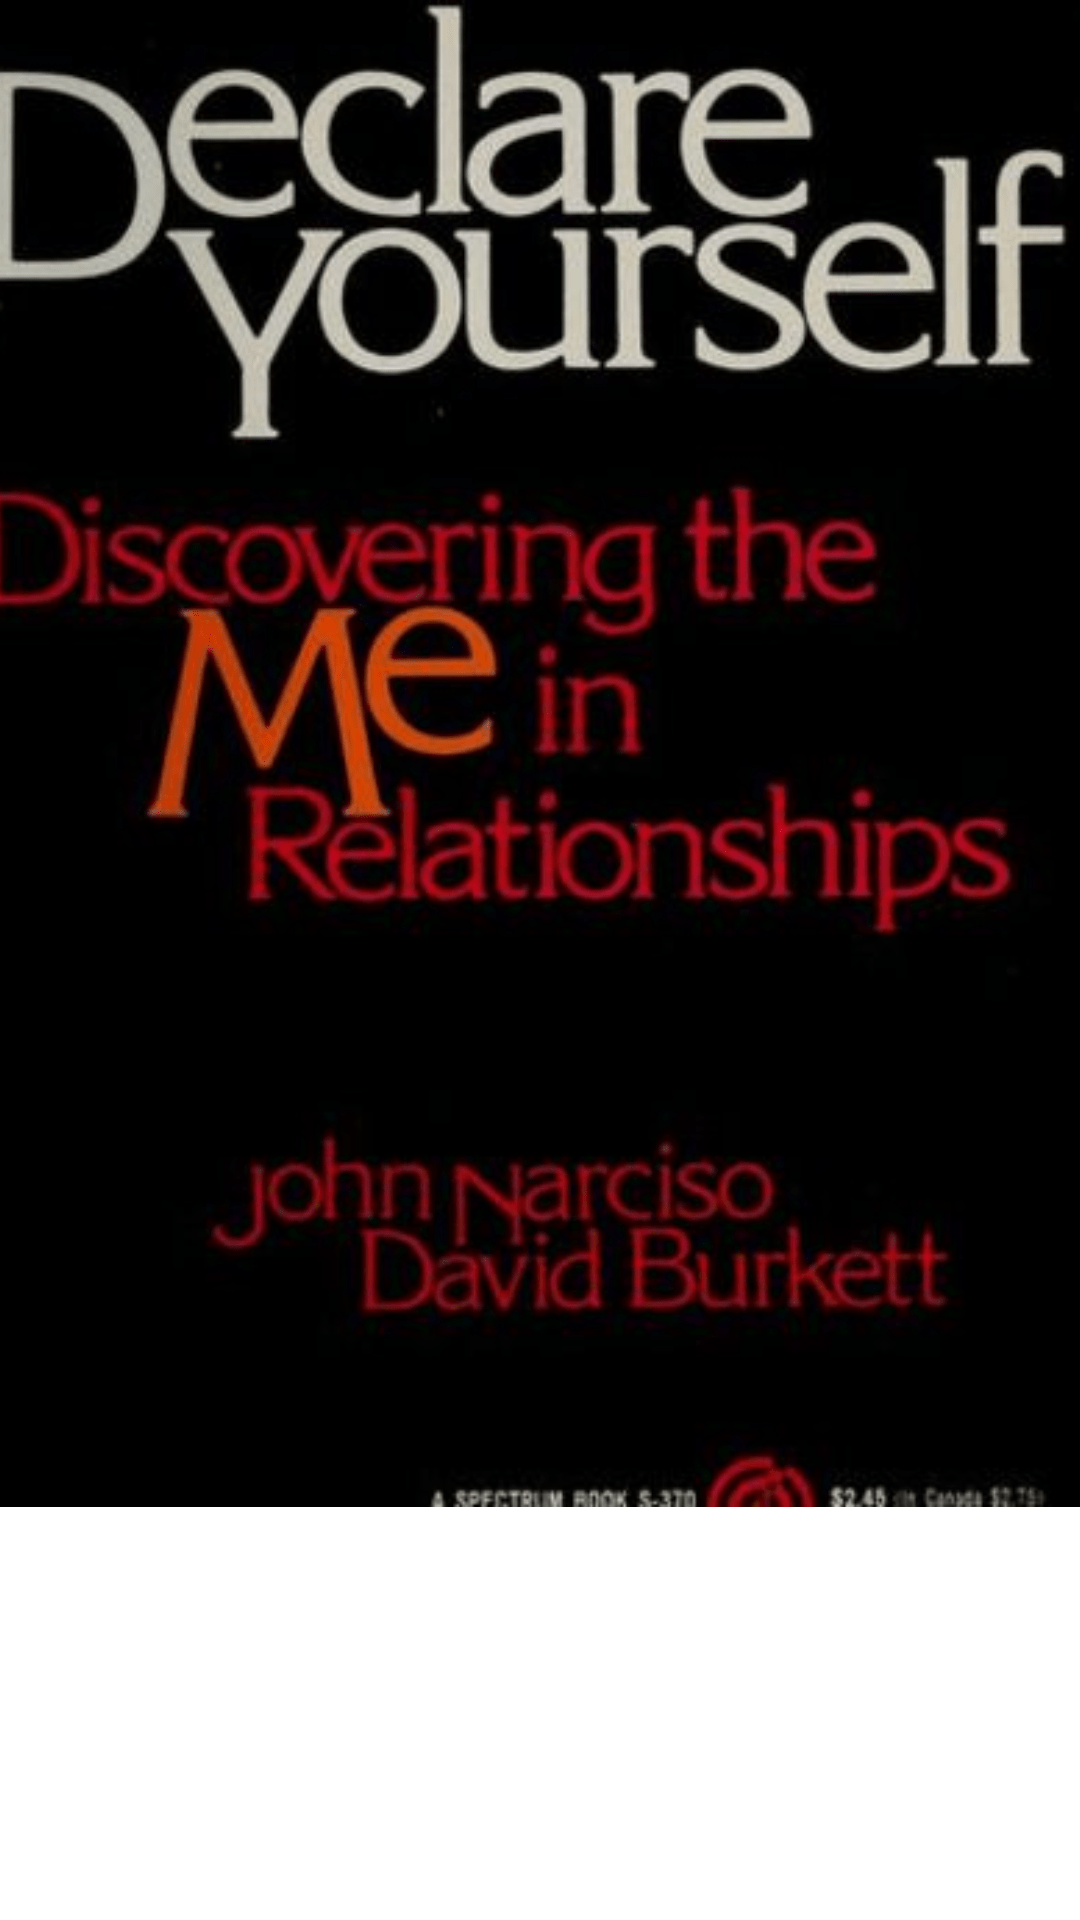 Declare Yourself: Discovering the Me in Relationships